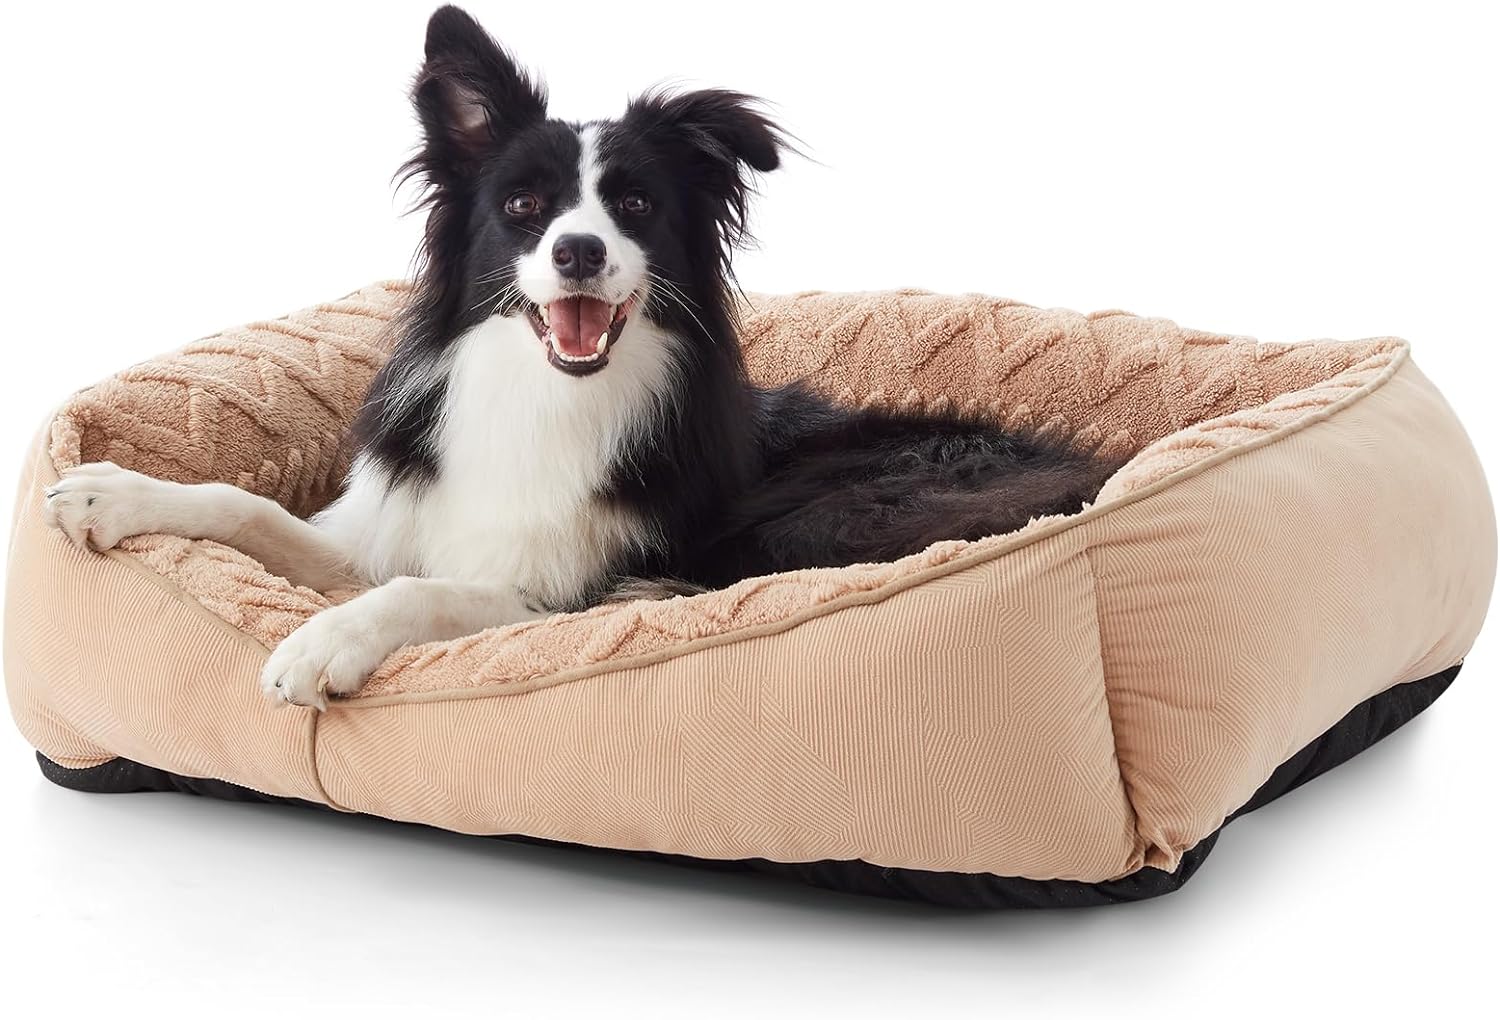 GASUR Rectangle Dog Bed, Medium Dog Bed for Large Medium Small Dogs, Soft Breathable Puppy Bed Washable Sleeping Dog Bed, Pet Cuddler with Anti-Slip Bottom, Warming Calming Sleeping Puppy Bed